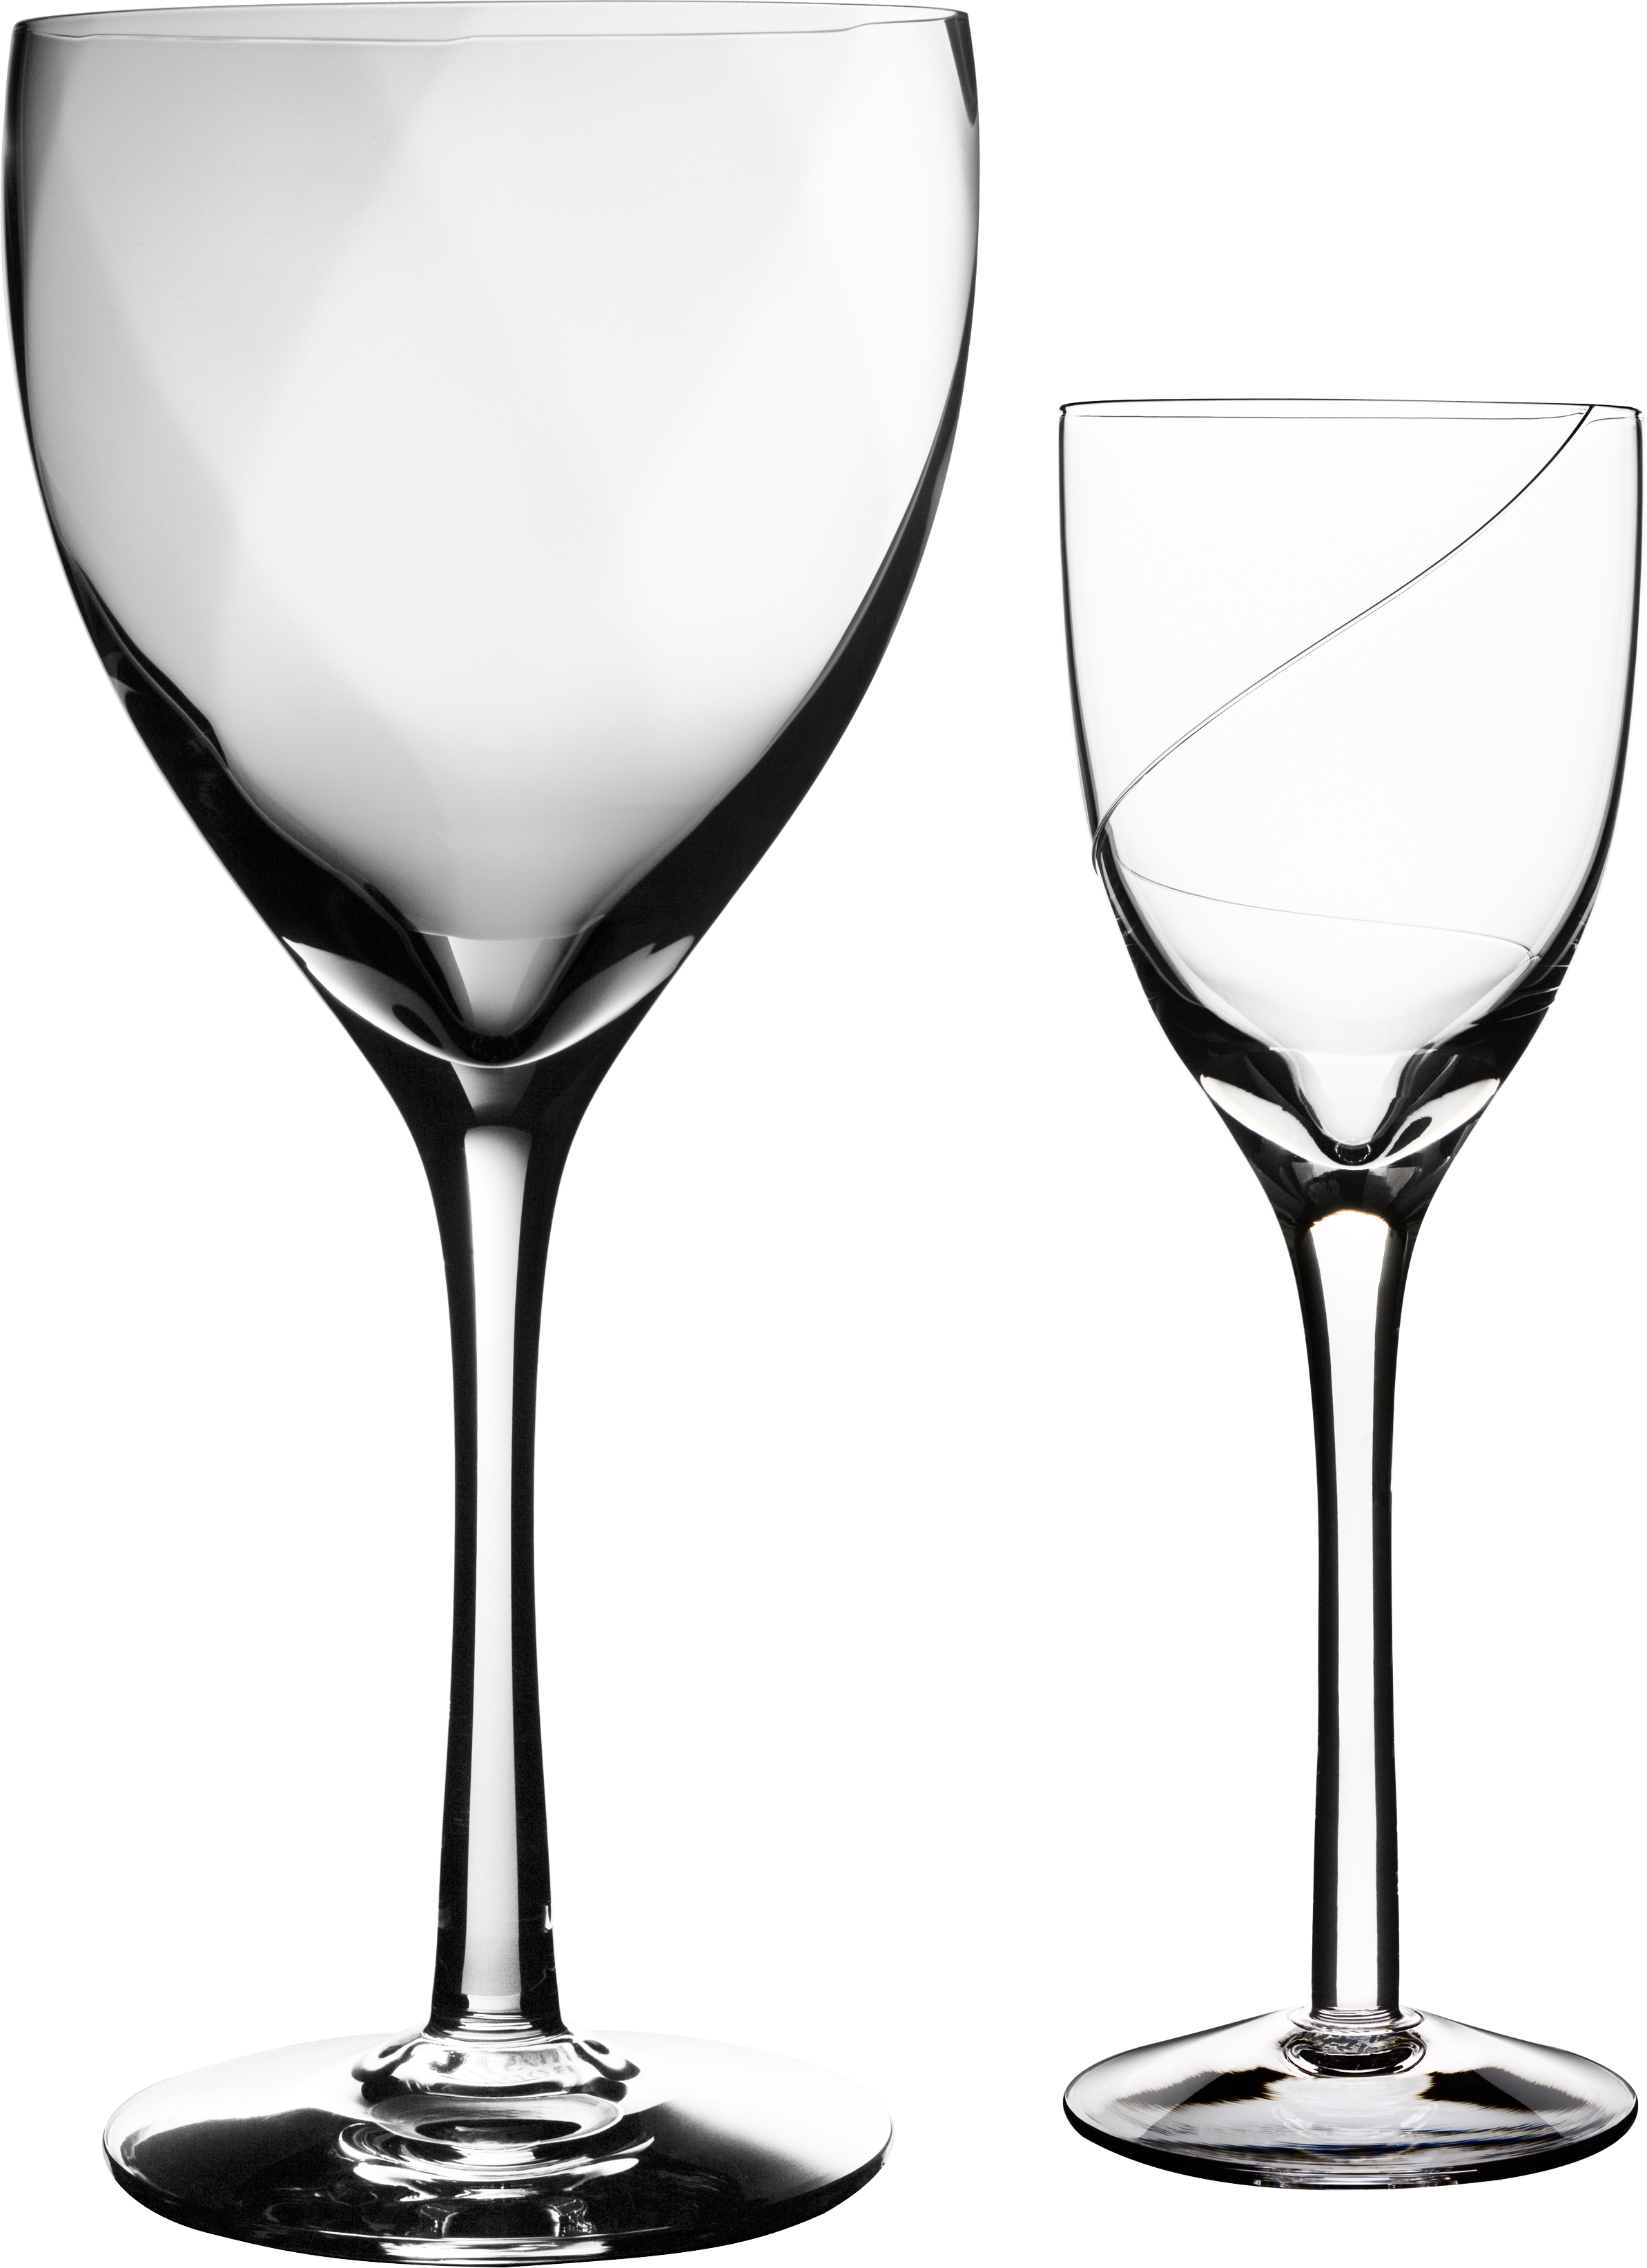 Glass Png Image - Glass (2386x3286)